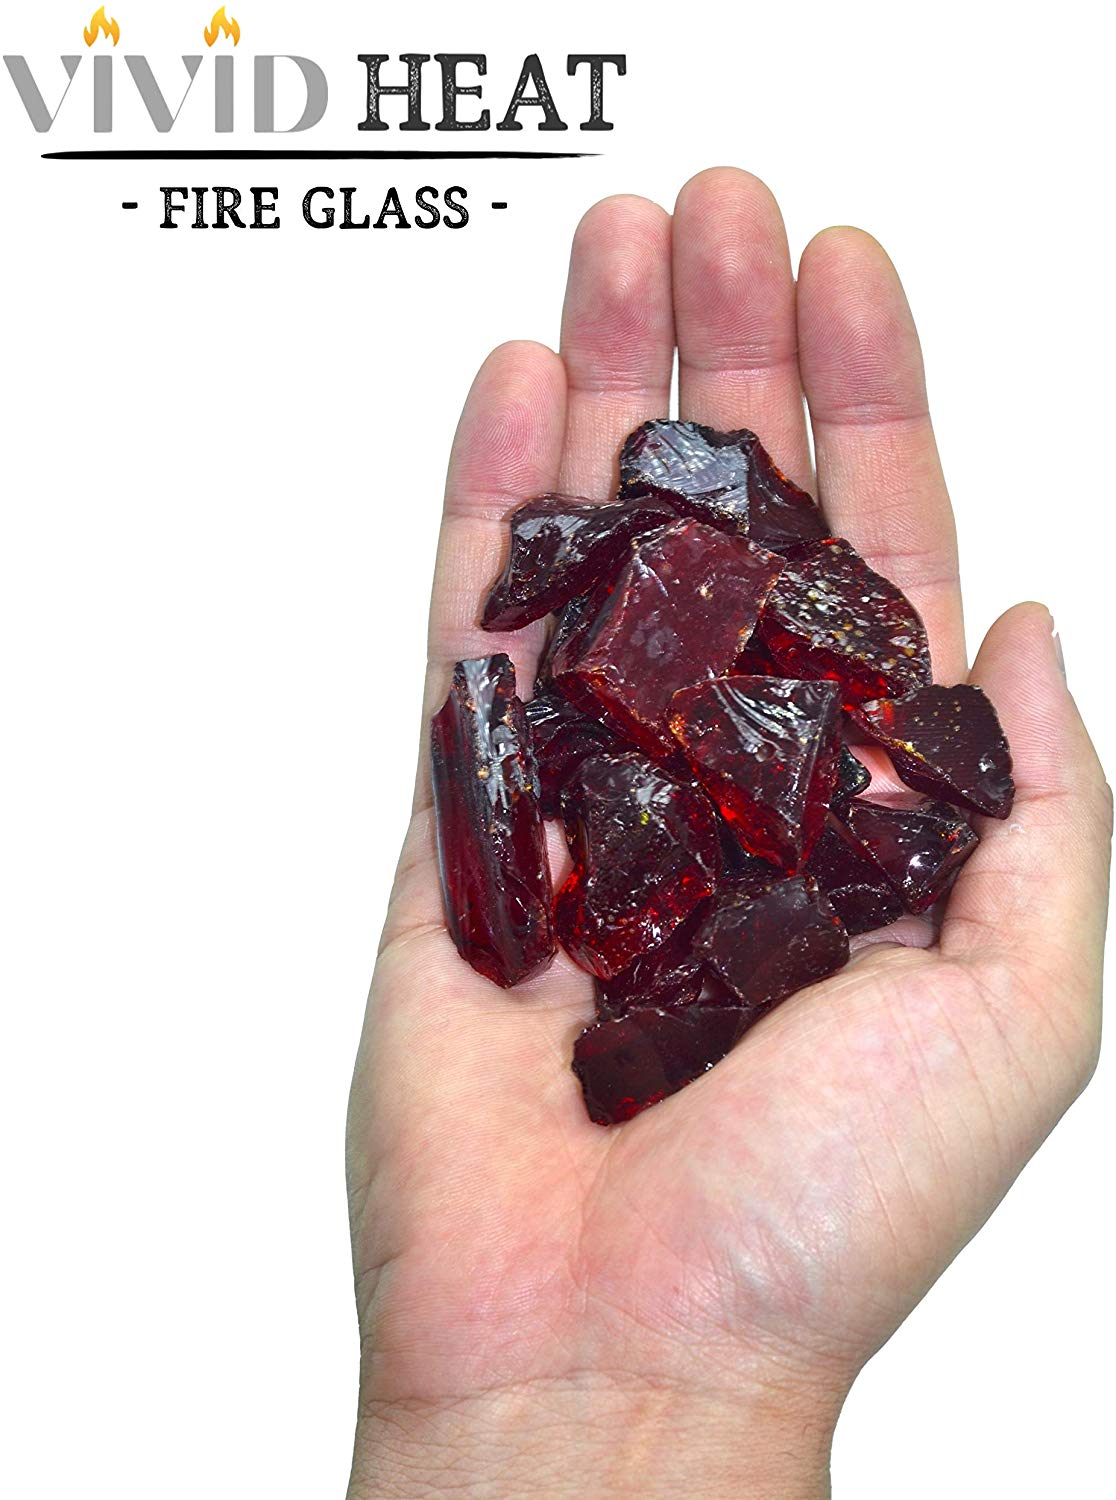 Red 1/2" - 3/4" Large Premium Fire Glass for Fireplace and Fire Pit